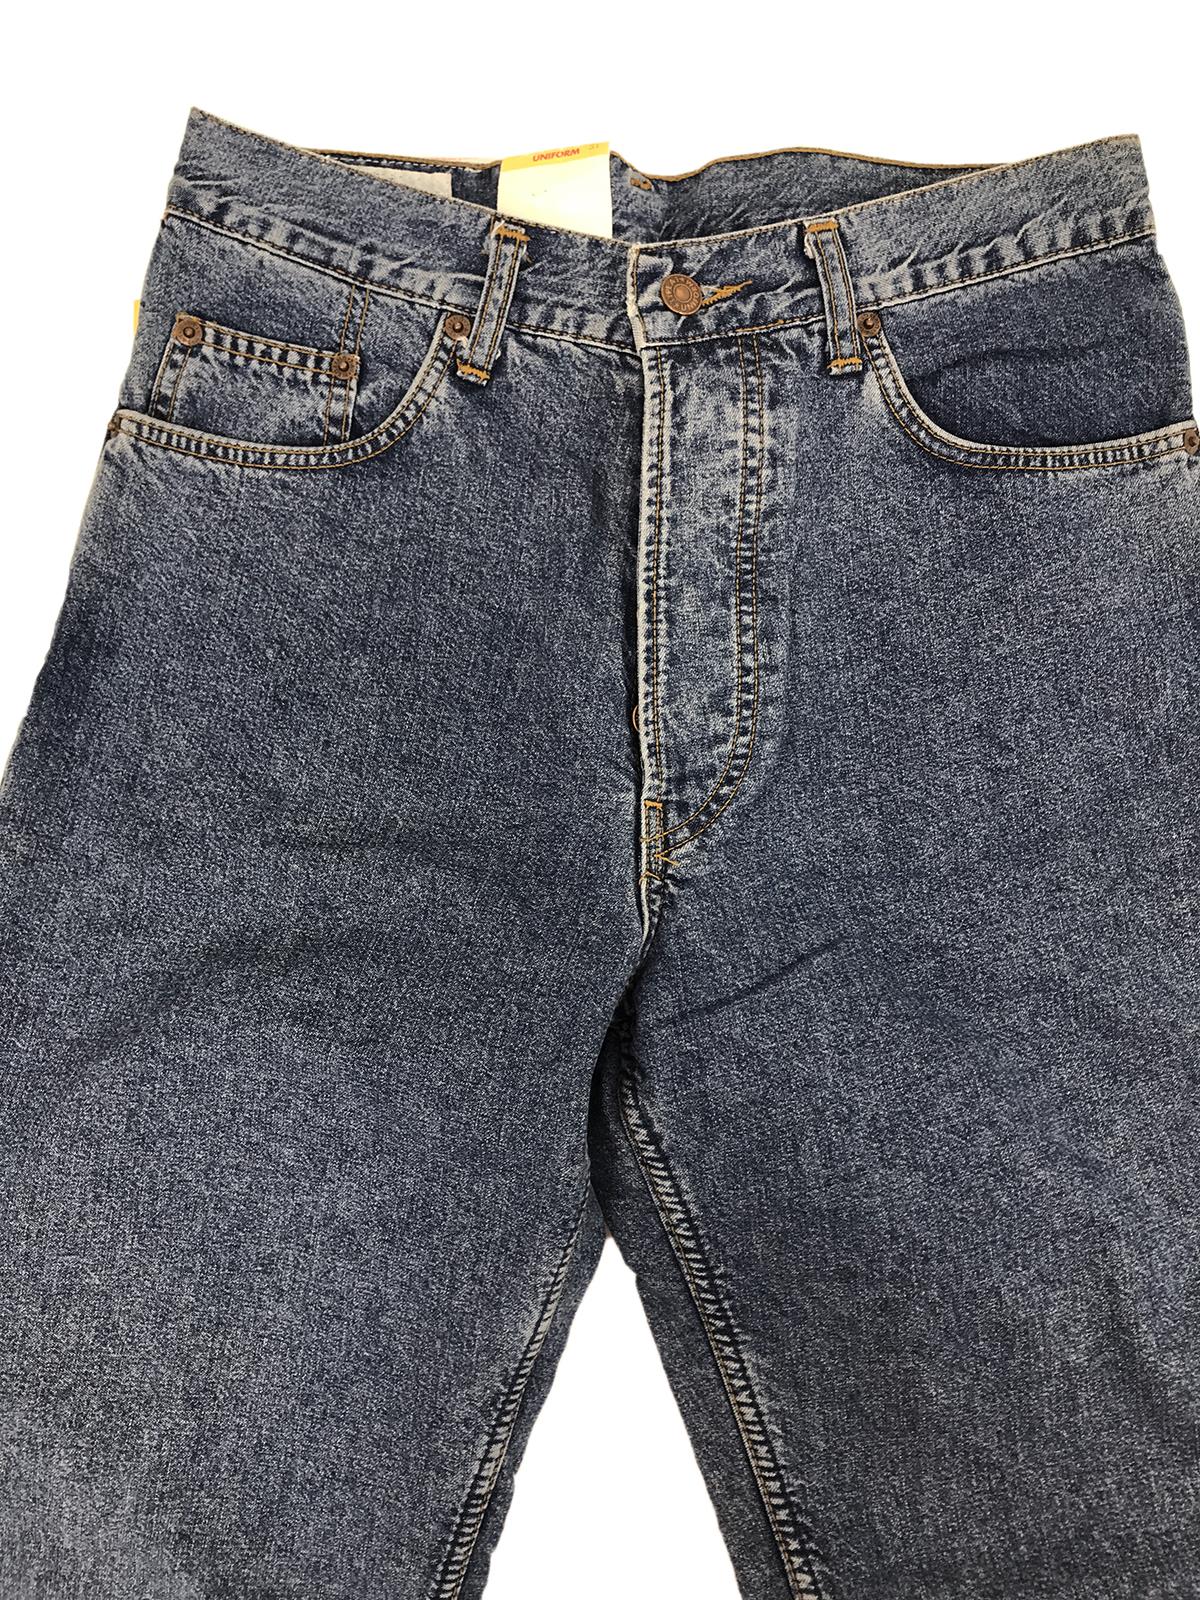 UNIFORM 351 Frontier Jeans with Plush Lining